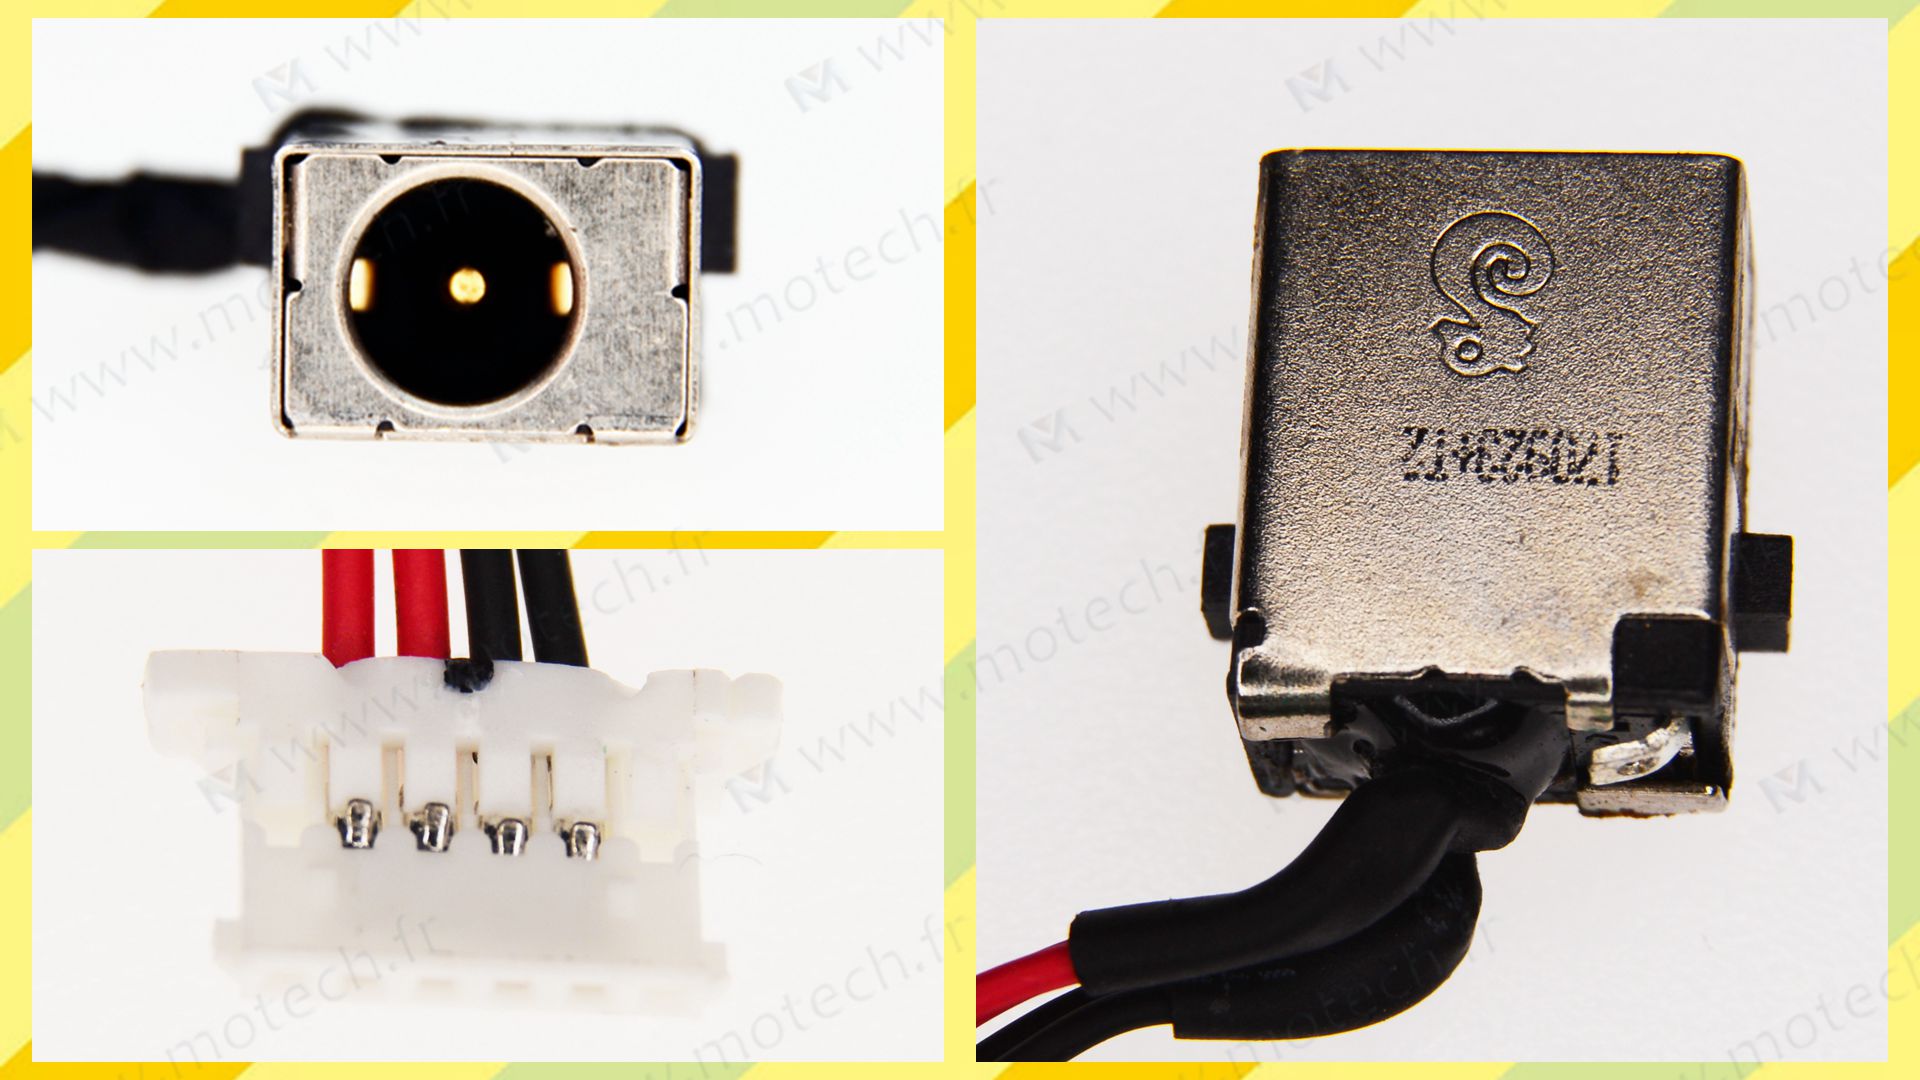 Acer A114-32 charging connector, Acer A114-32 DC Power Jack, Acer A114-32 DC IN Cable, Acer A114-32 Power Jack, Acer A114-32 plug, Acer A114-32 Jack socket, Acer A114-32 connecteur de charge, 